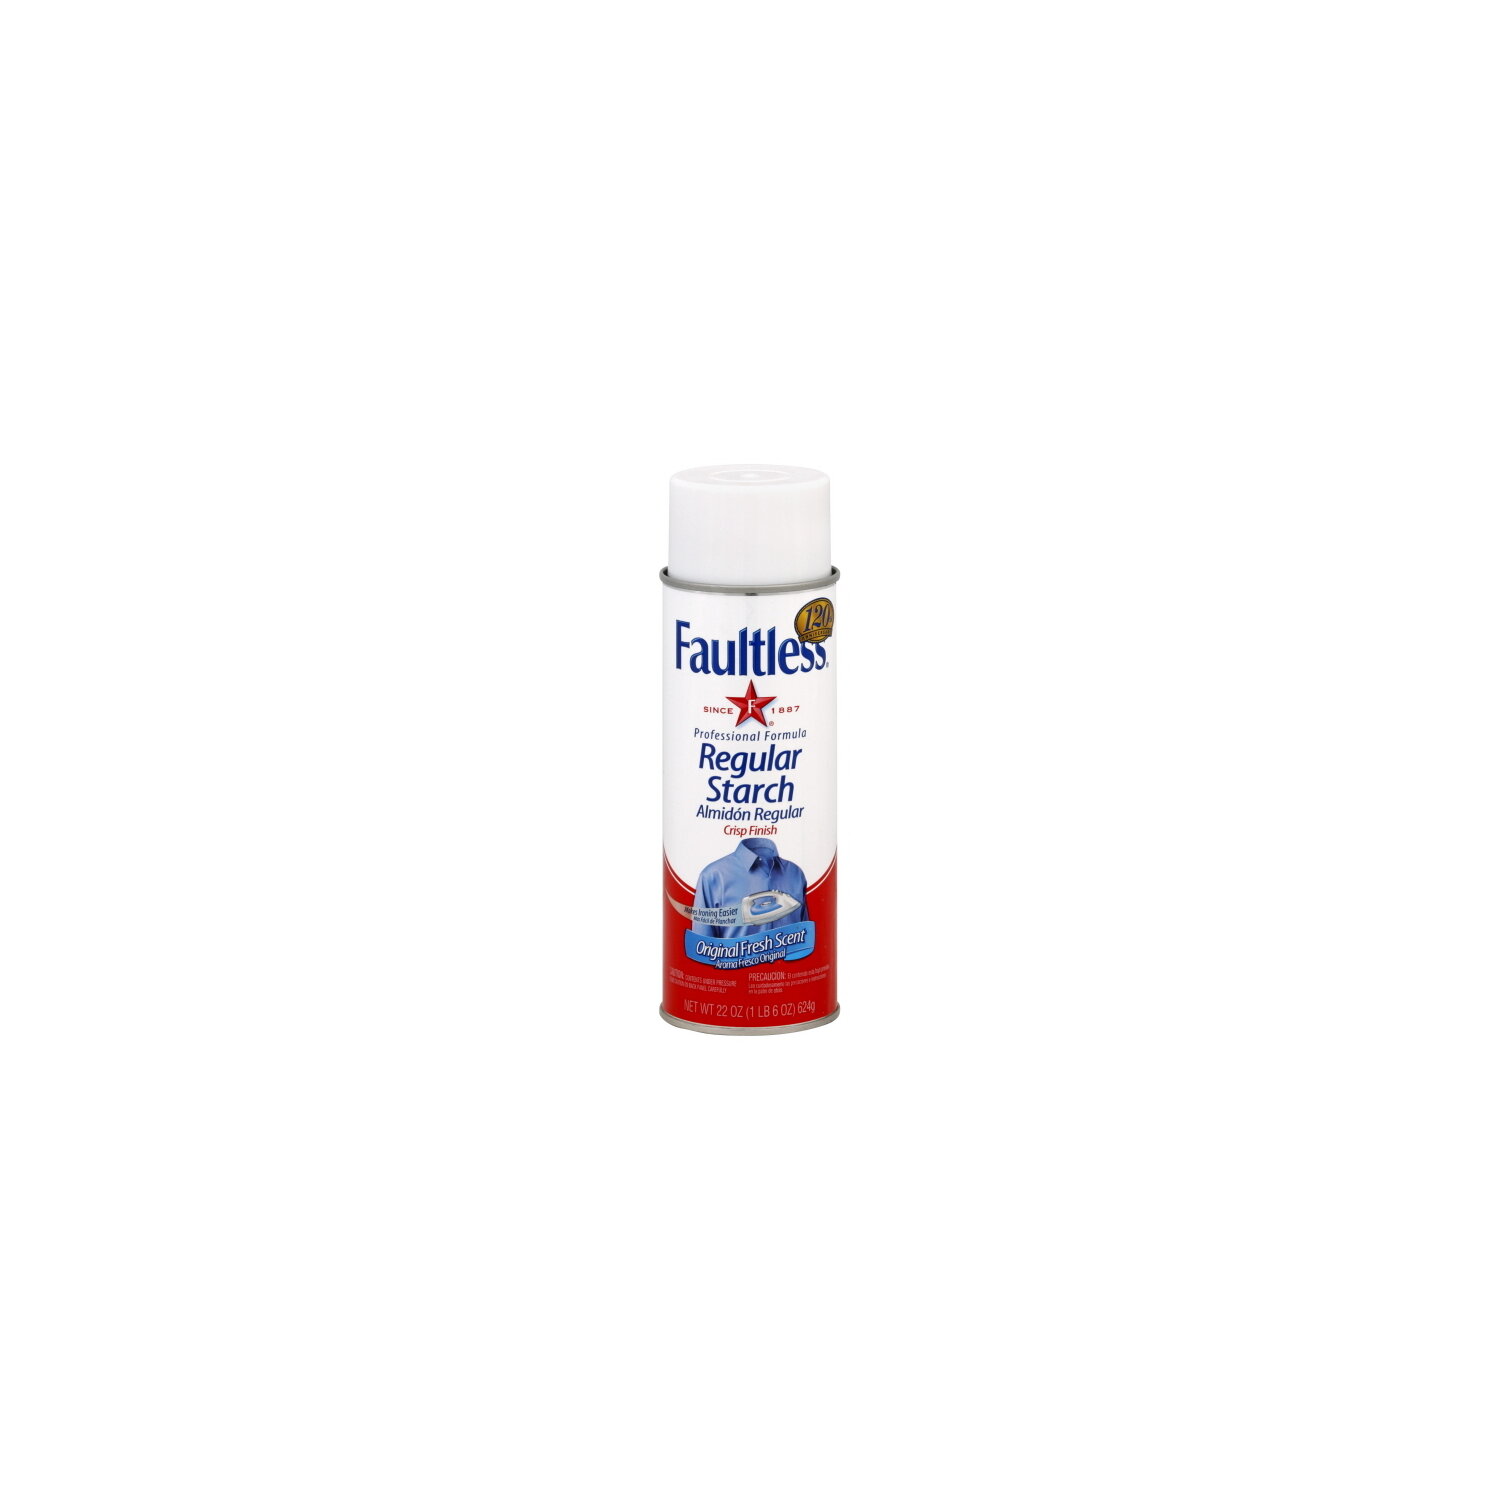 Sta Flo Liquid Starch, Concentrated, Pantry